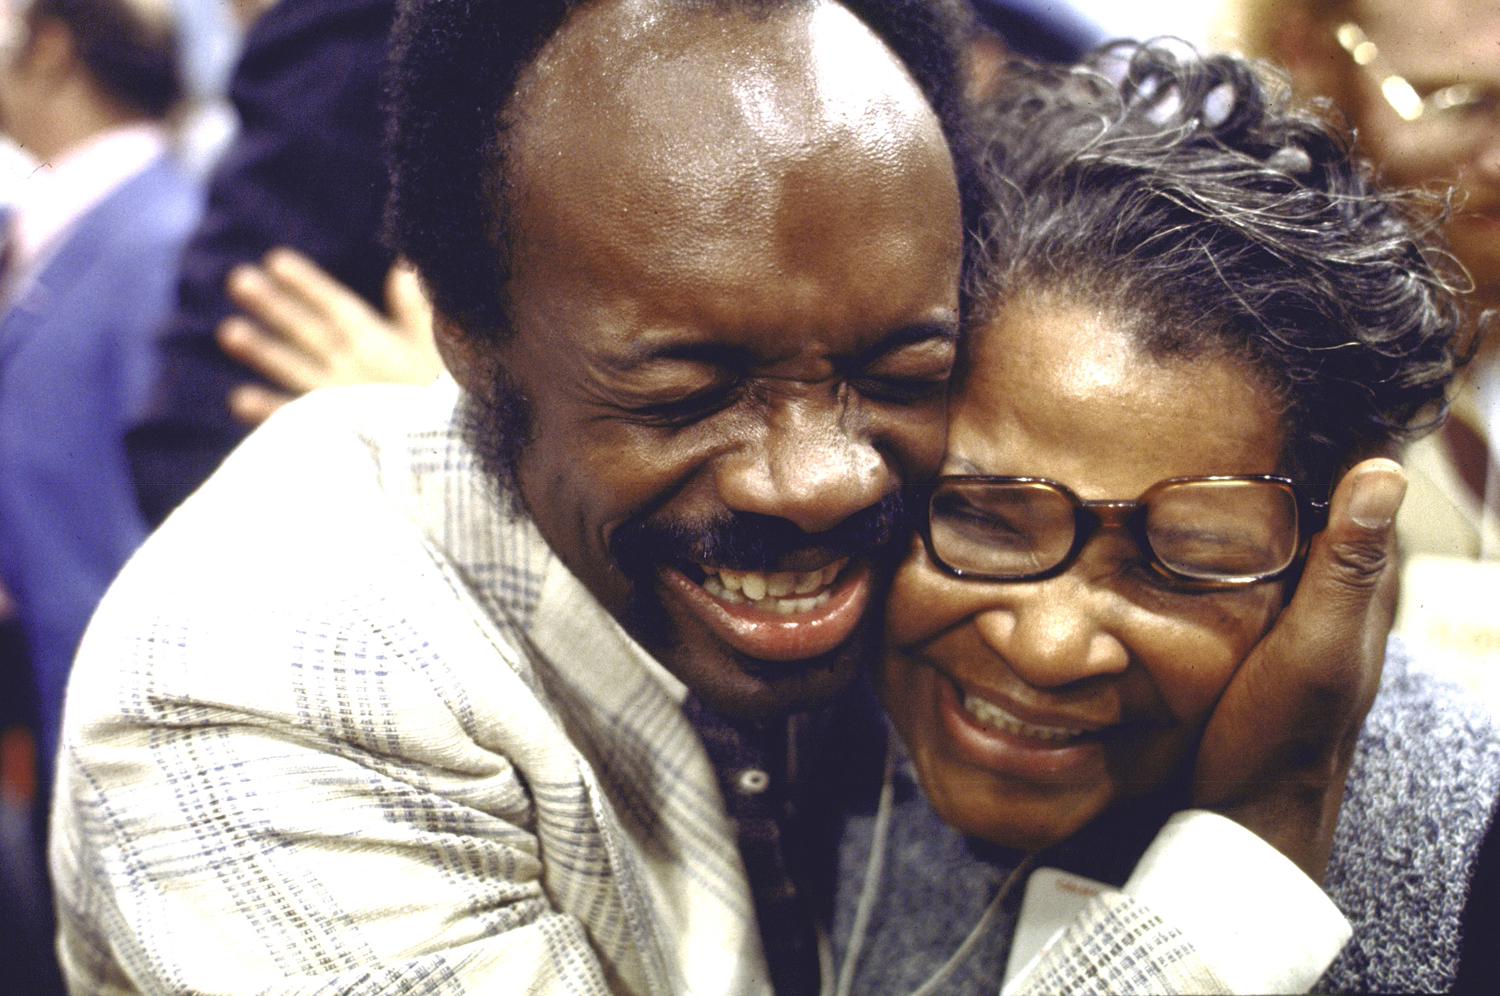 George McGovern delegation co-chair Willie Brown, Jr.—later the powerful, long-time Speaker of the California State Assembly and, eventually, the mayor of San Francisco—embraces an unidentified woman during the 1972 Democratic National Convention in Miami Beach. McGovern would win his party's nomination, but was crushed by Richard Nixon during the presidential election, winning only Massachusetts and the District of Columbia.